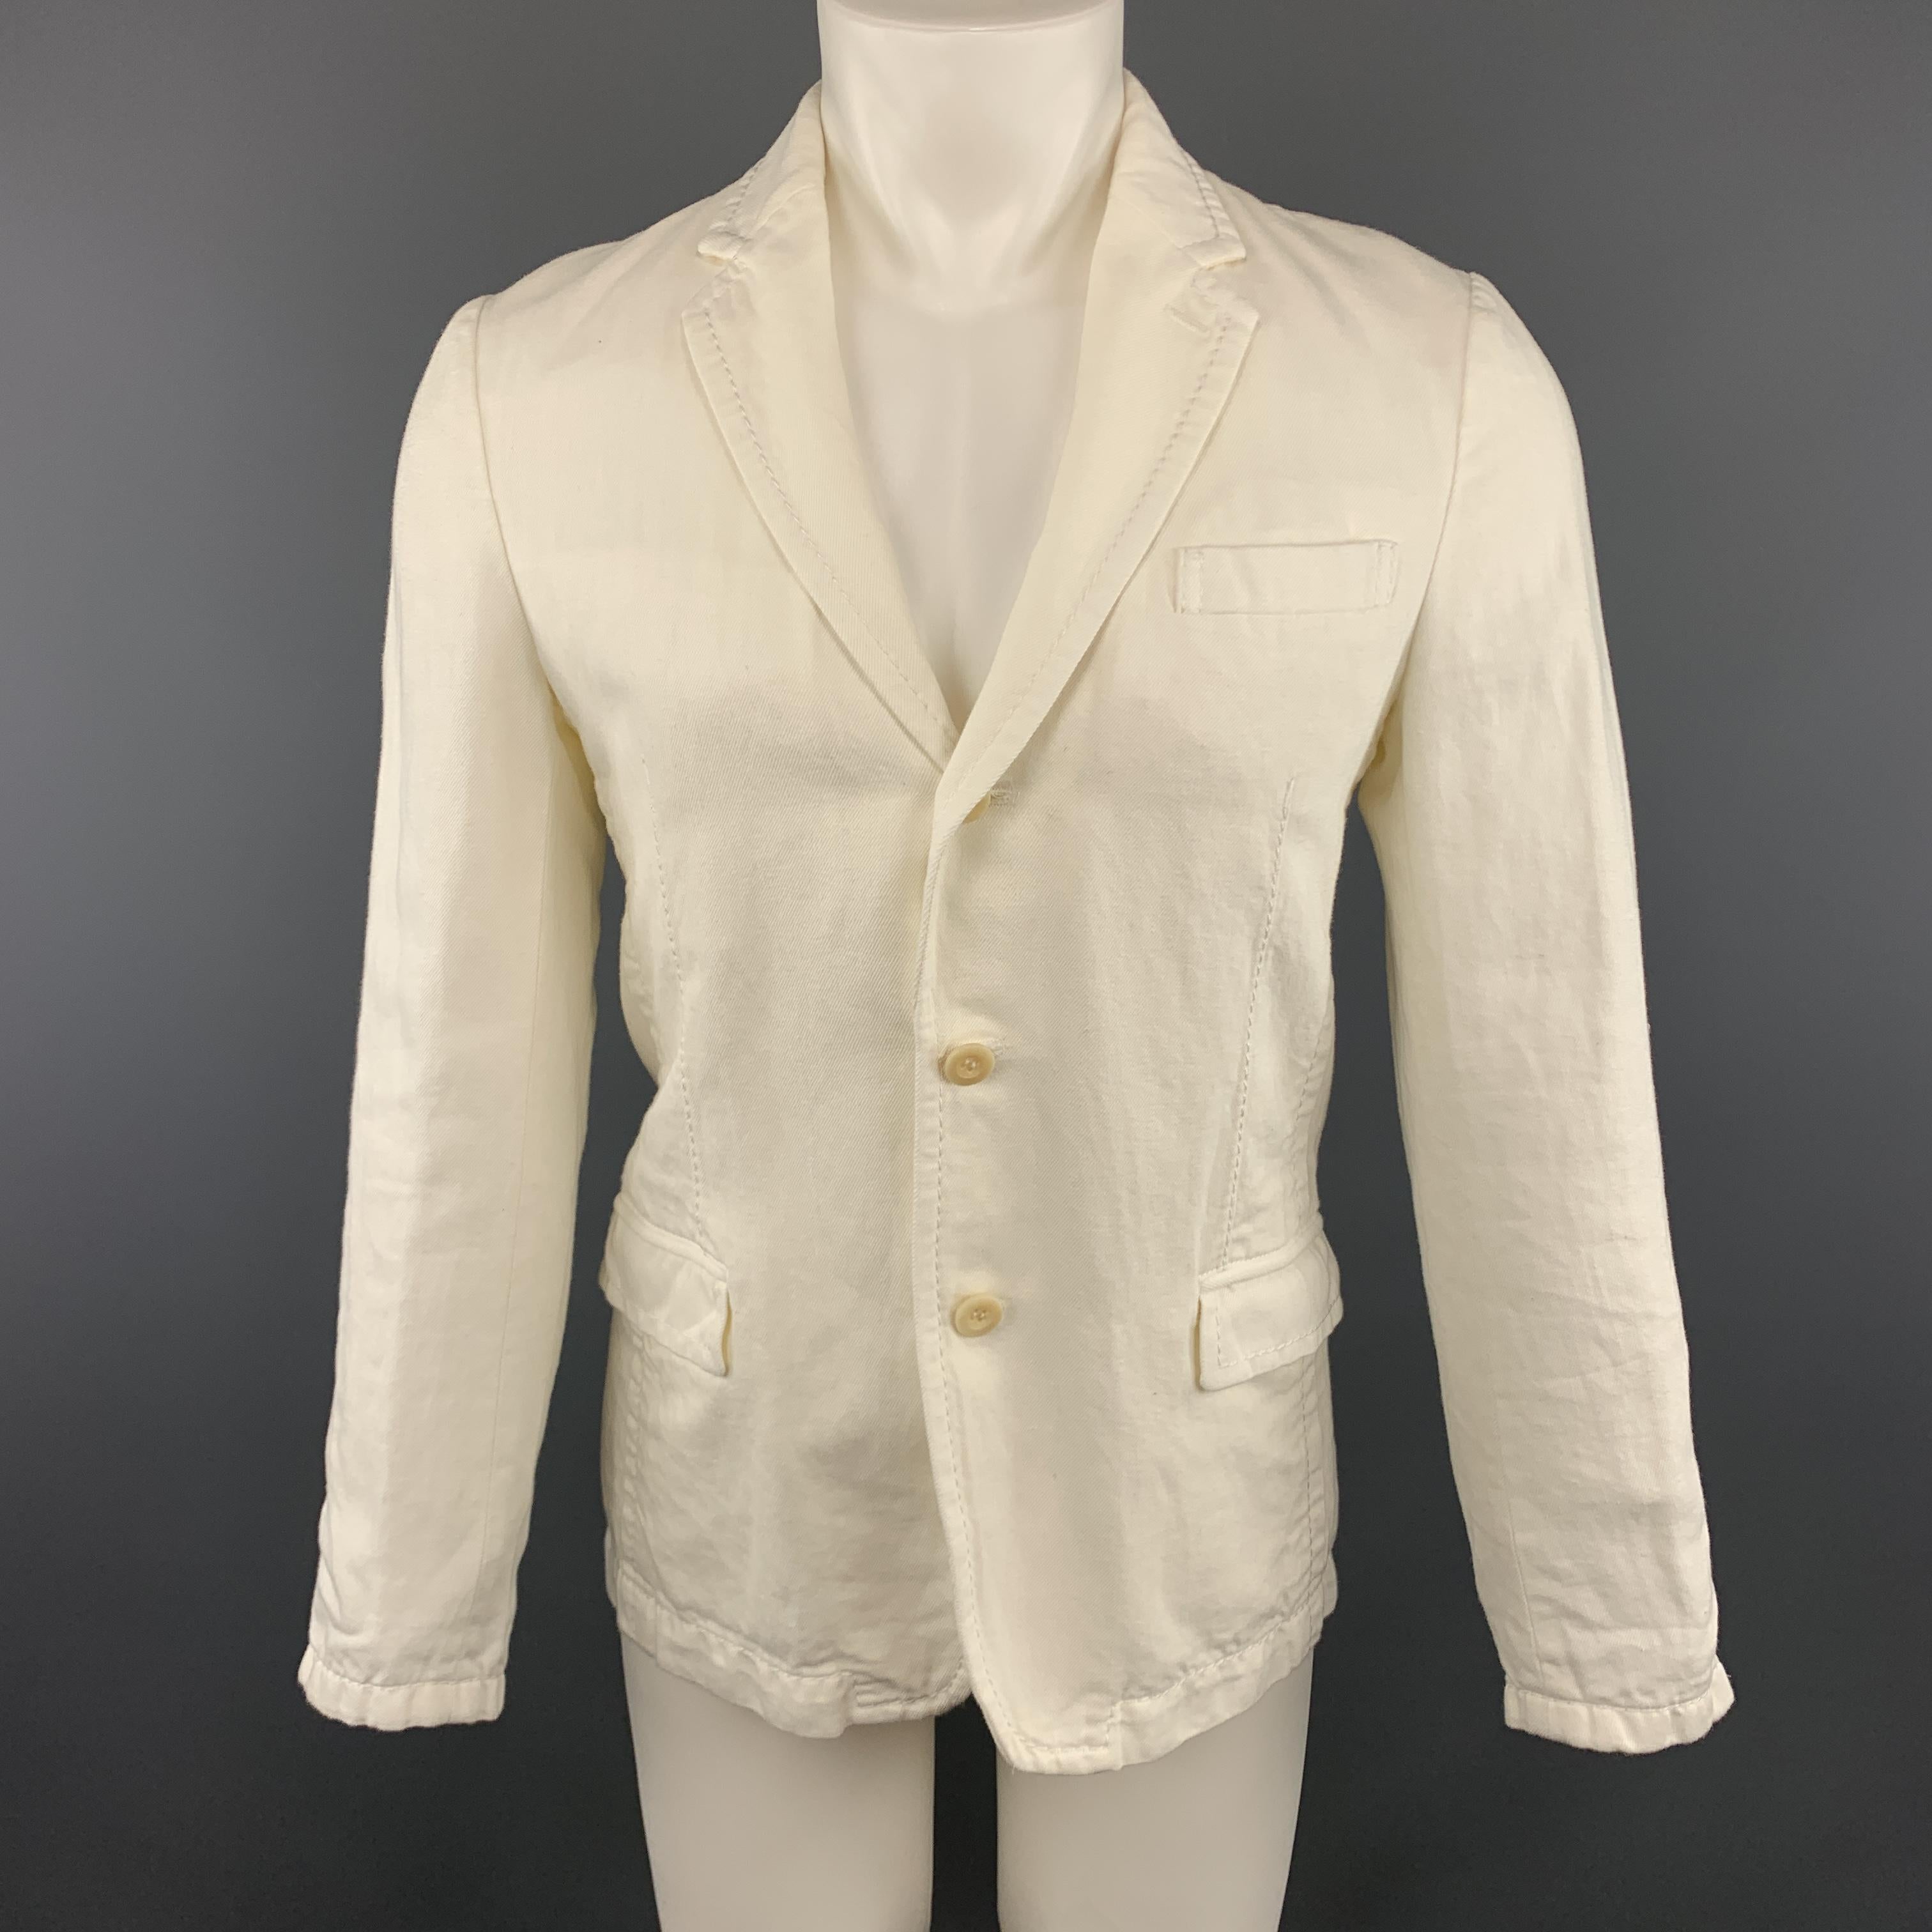 SACAI Sport Coat comes in an off white tone in solid cotton / linen material, with a notch lapel, a ruffle detachable panel, slit and flap pockets, functional buttons at cuffs, a single vent at back, unlined. Made in Japan.

Excellent Pre-Owned